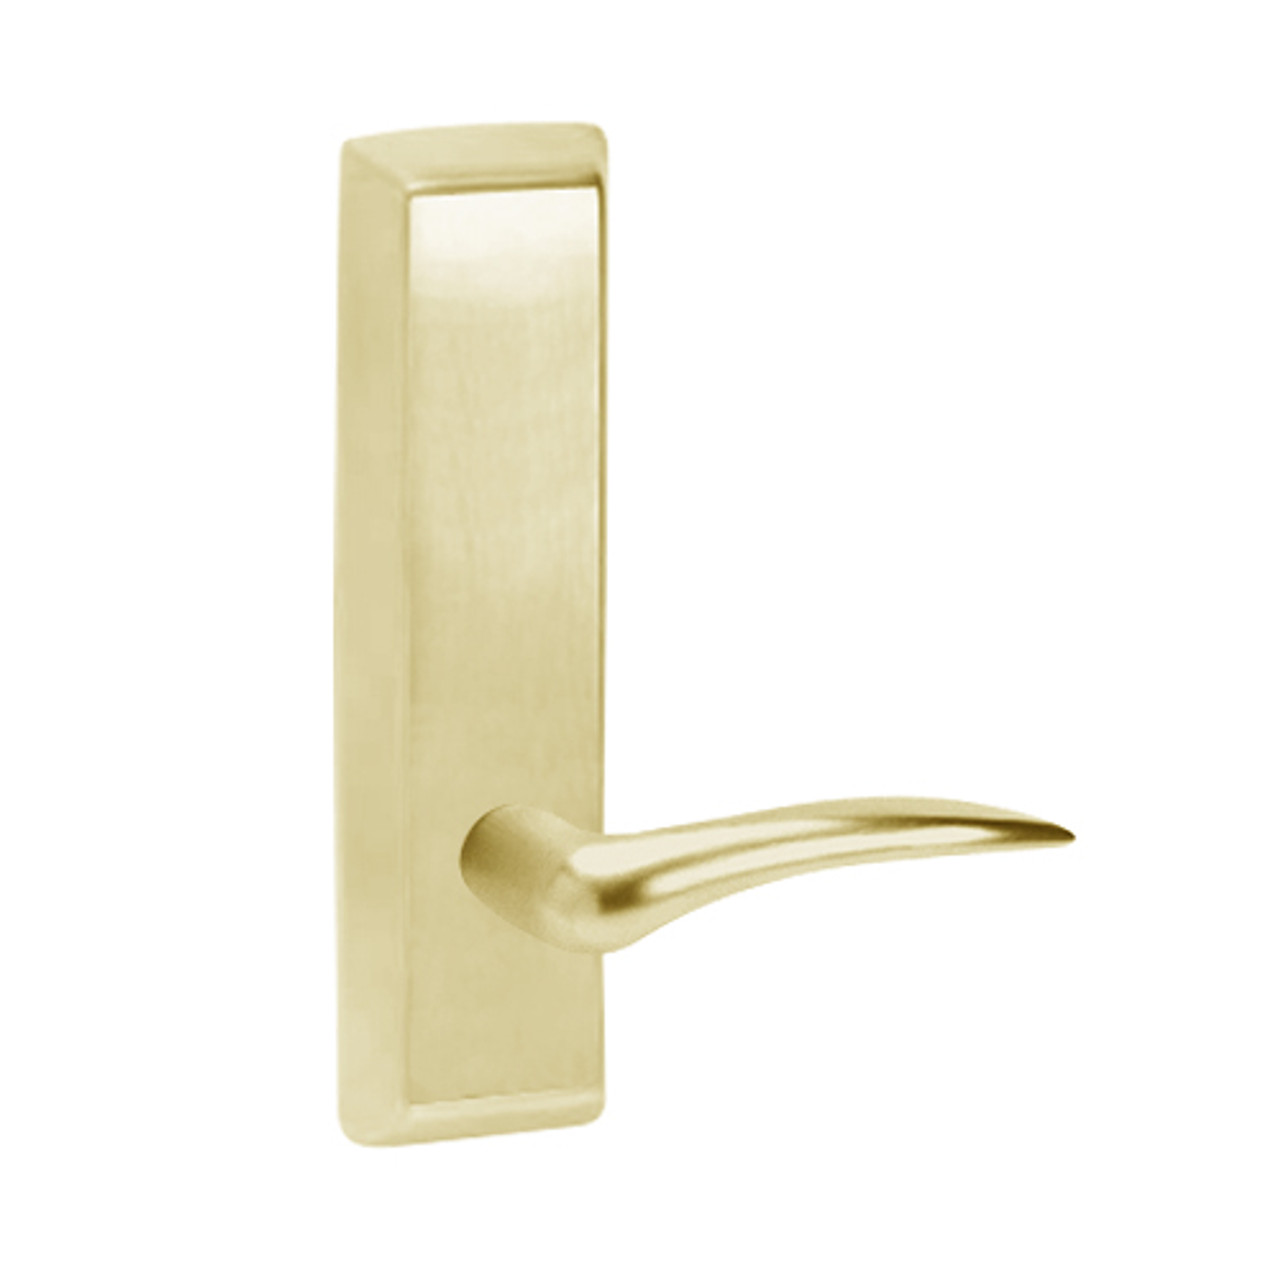 D950-605-LHR Corbin ED5000 Series Exit Device Trim with Dummy Dirke Lever in Bright Brass Finish